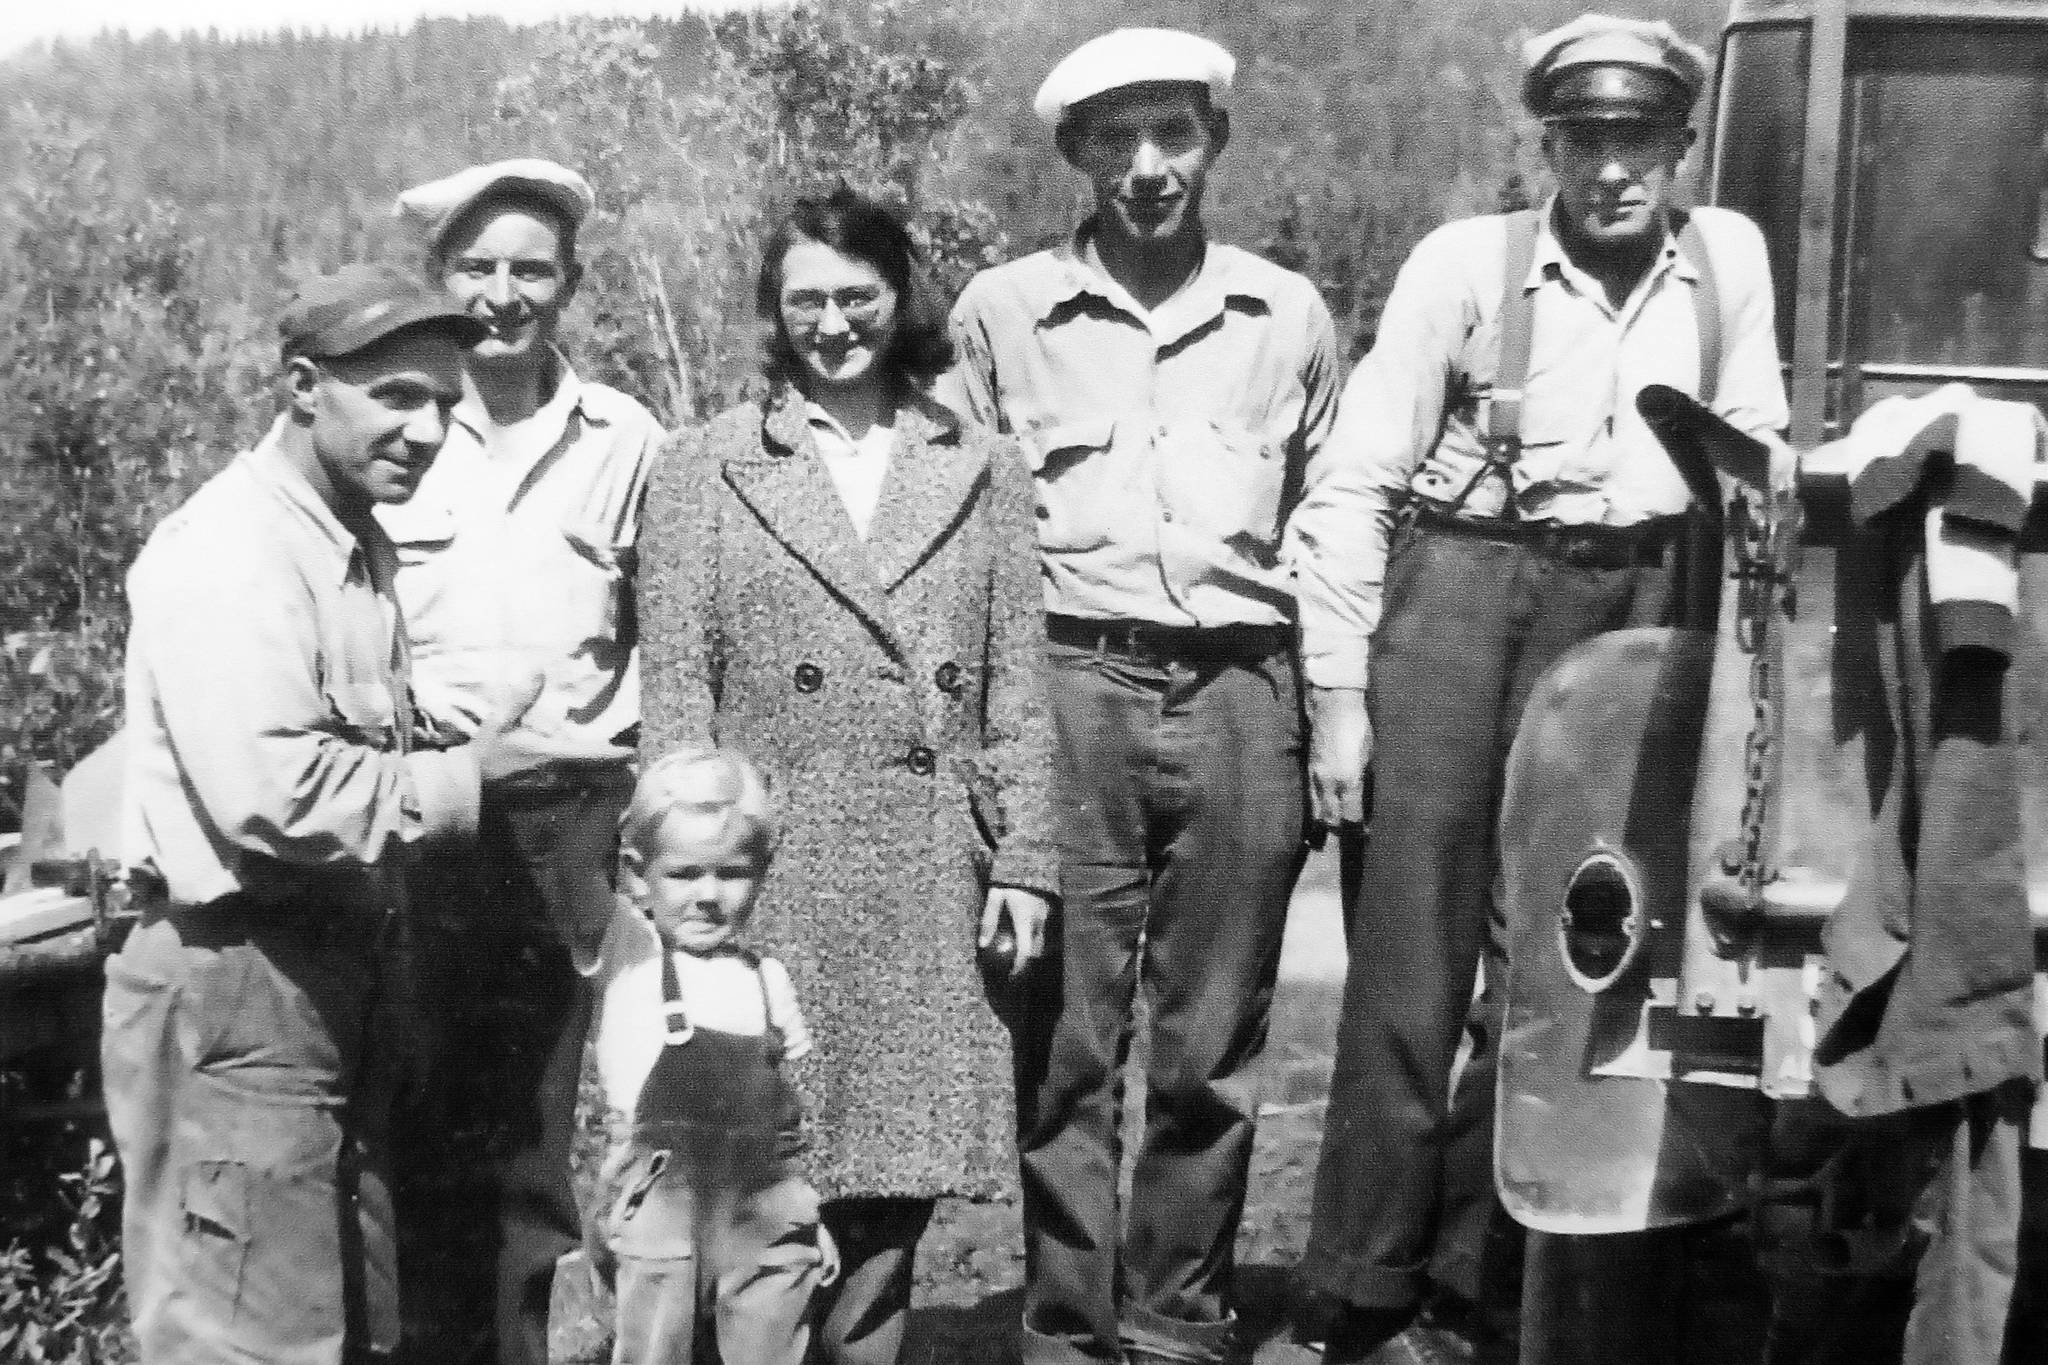 Cooper Landing characters (from left): “Little Jim” Dunmire, Harold and Gary Davis, Beverly and Joe Sabrowski, and “Big Jim” O’Brien, circa 1940s. (Photo provided by Mona Painter)